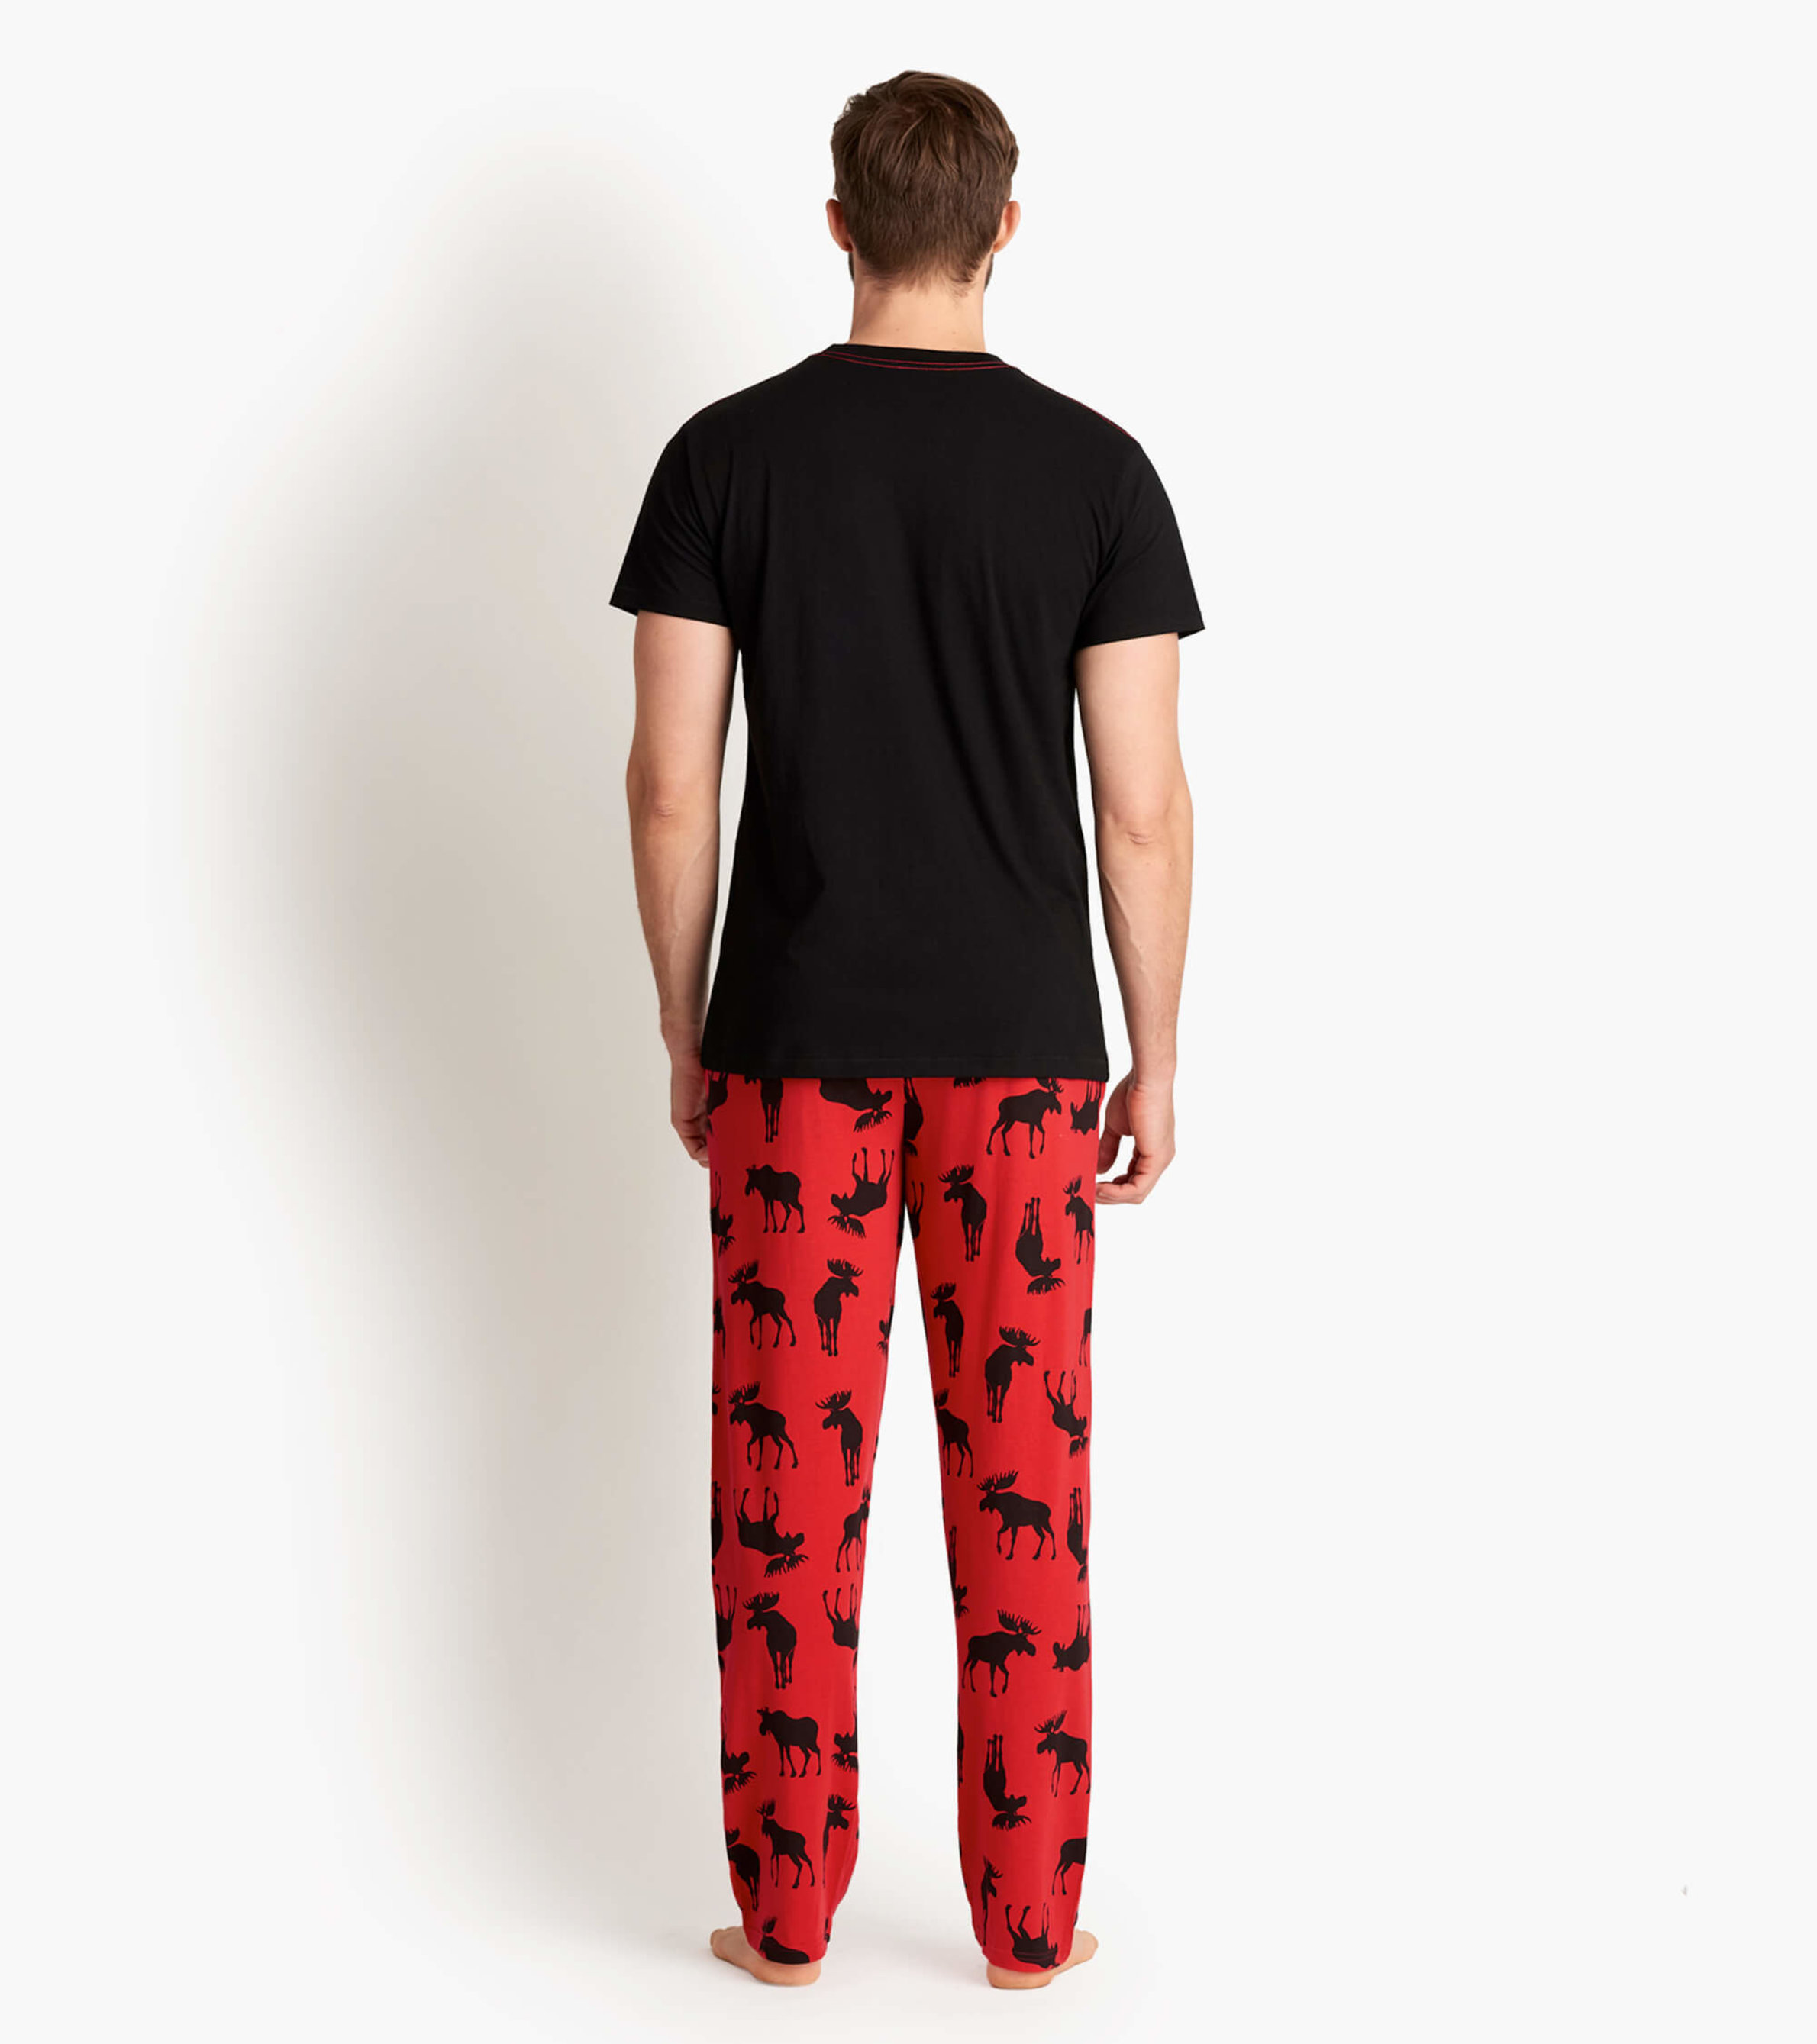 Moose On Red Men's Jersey Pajama Pants - Little Blue House US